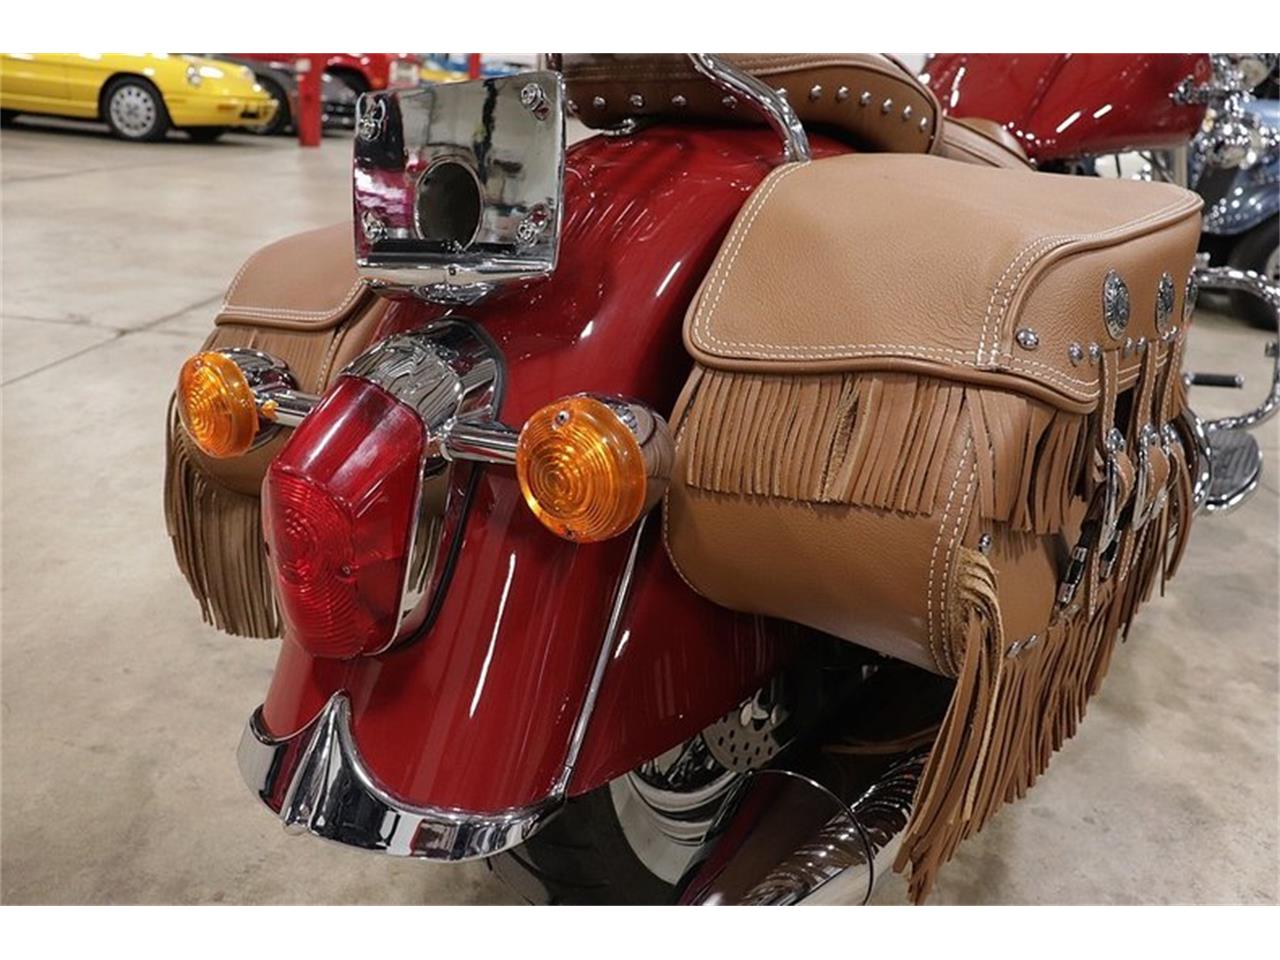 2009 Indian Chief for sale in Kentwood, MI – photo 24